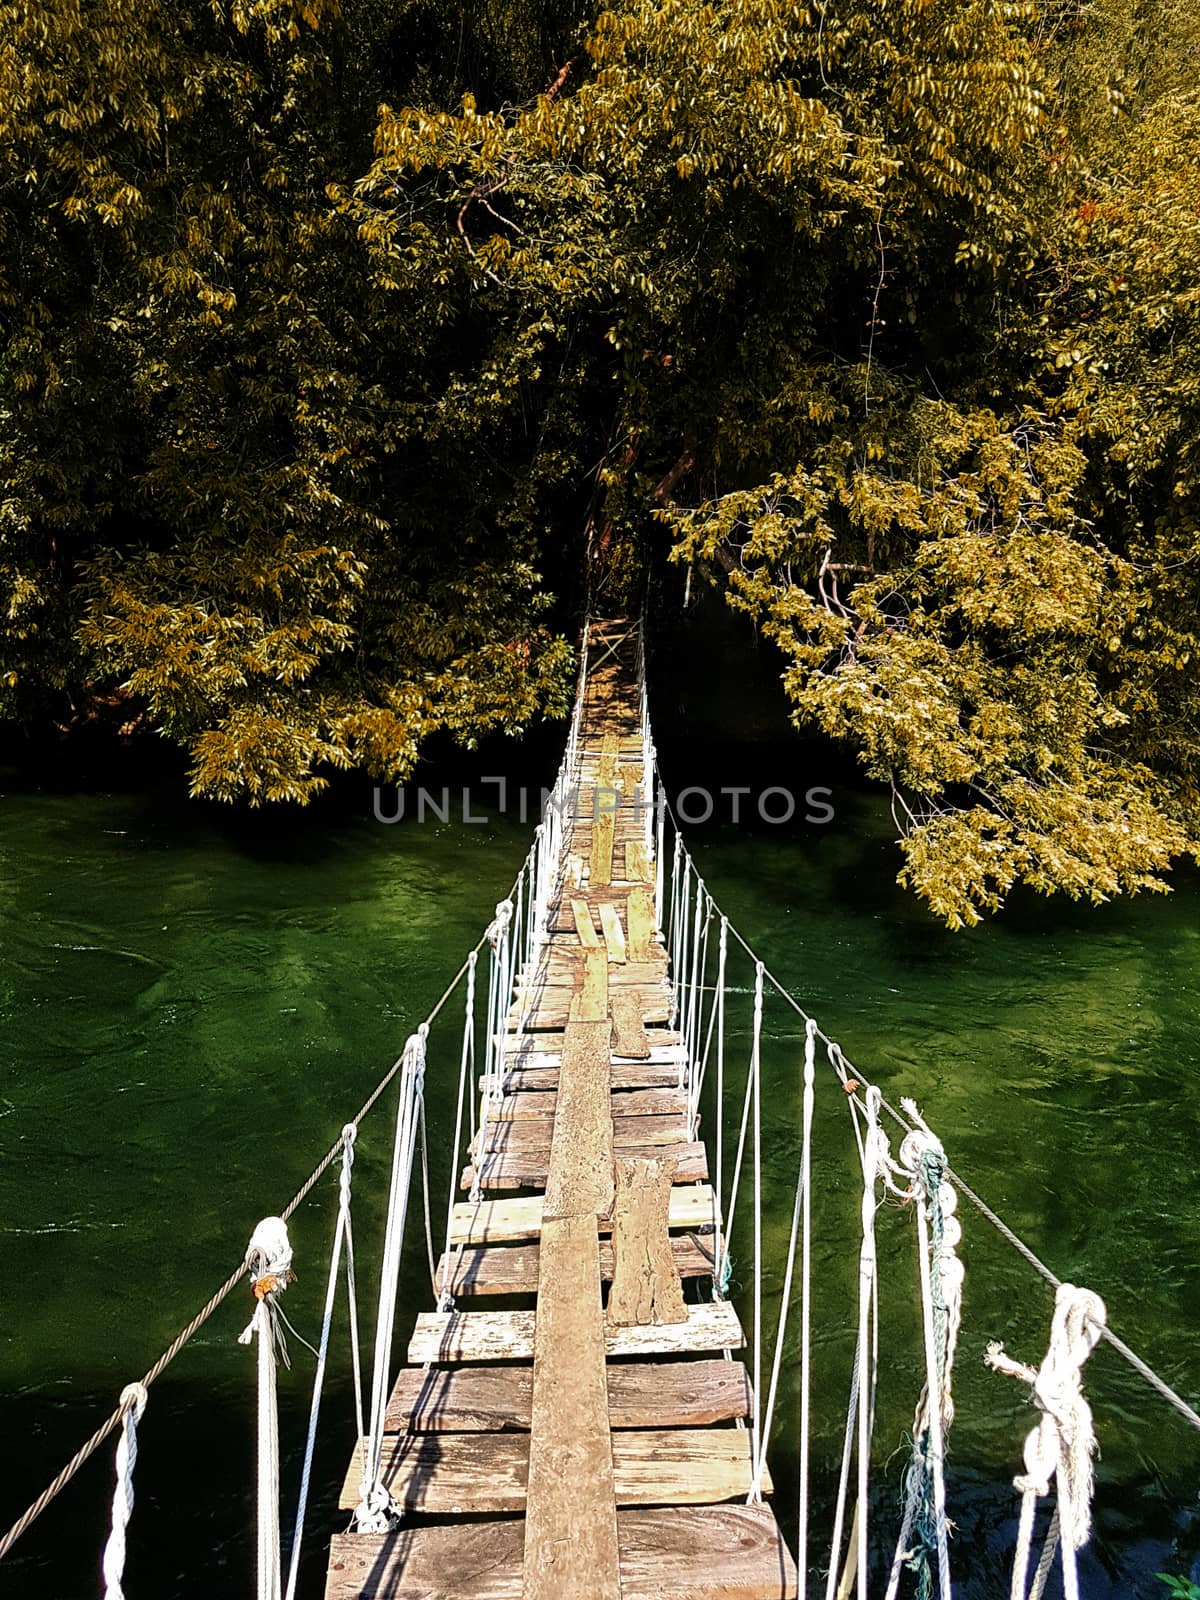 old wooden hanging suspension bridge crossing the river to the forest in autumn season with leaves color change. beautiful nature for background by asiandelight